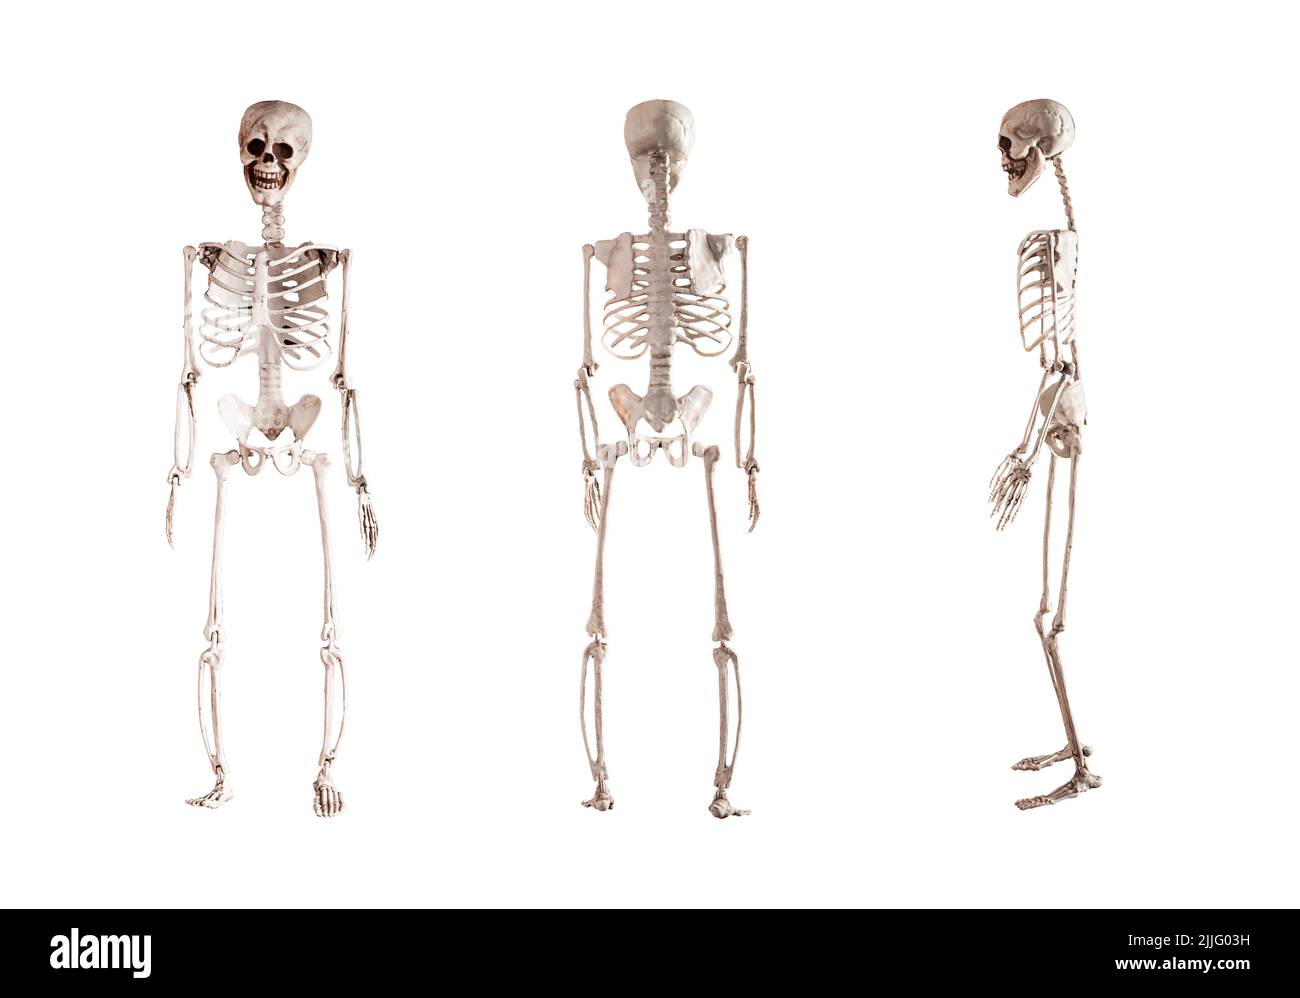 Human skeleton model isolated on white background. Front, back, side views. Anatomy or Halloween holiday concept. High quality photo Stock Photo